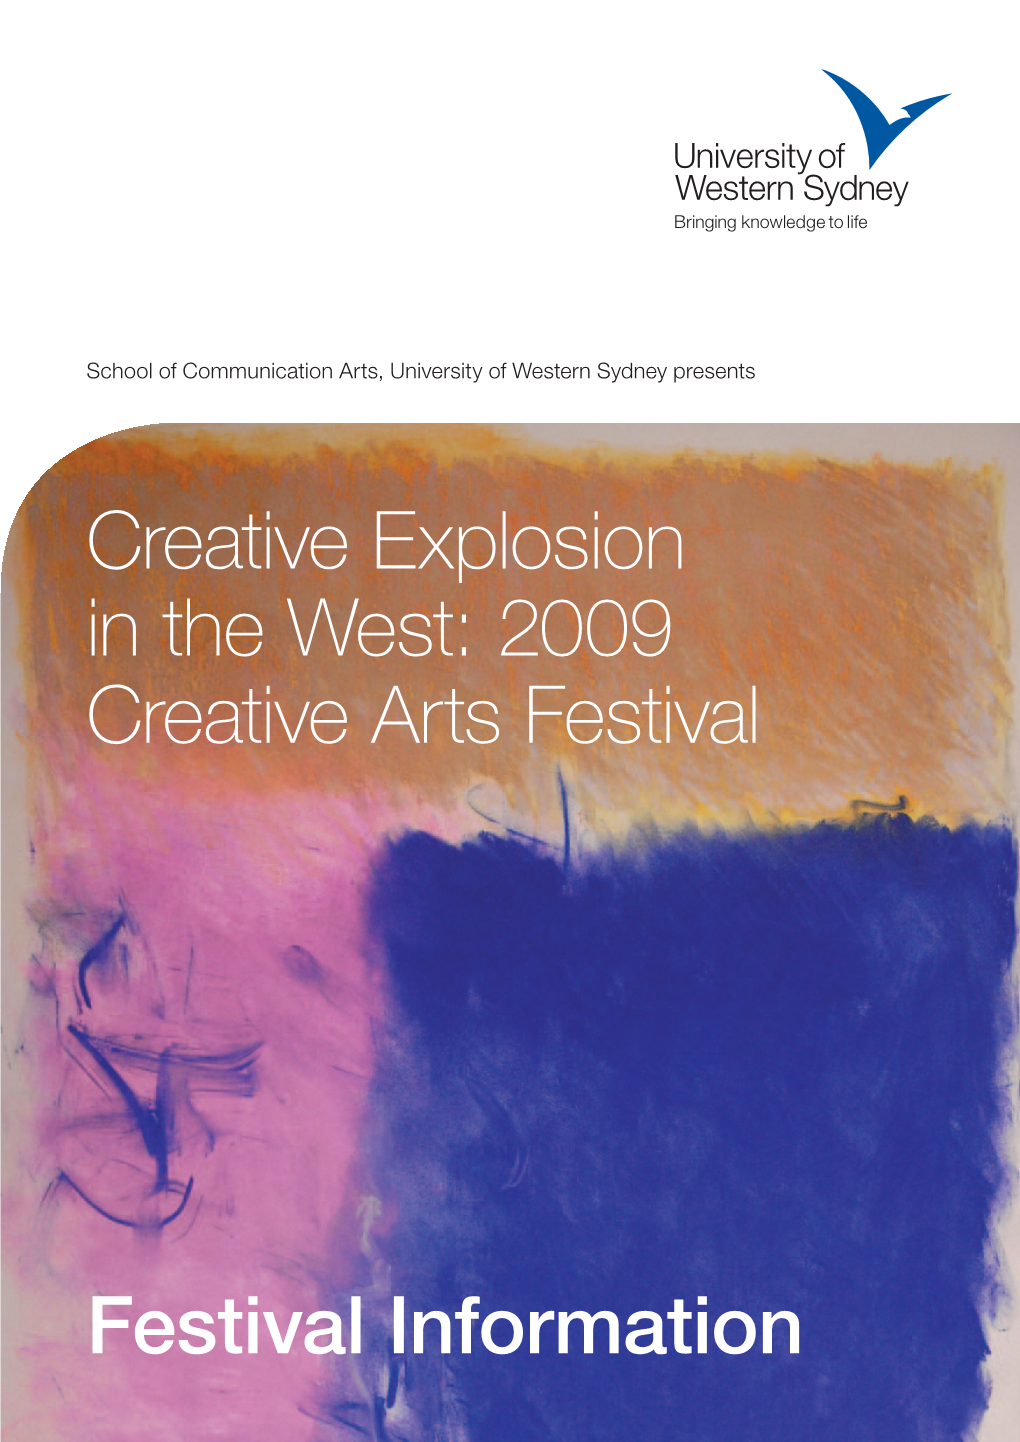 Creative Explosion in the West: 2009 Creative Arts Festival